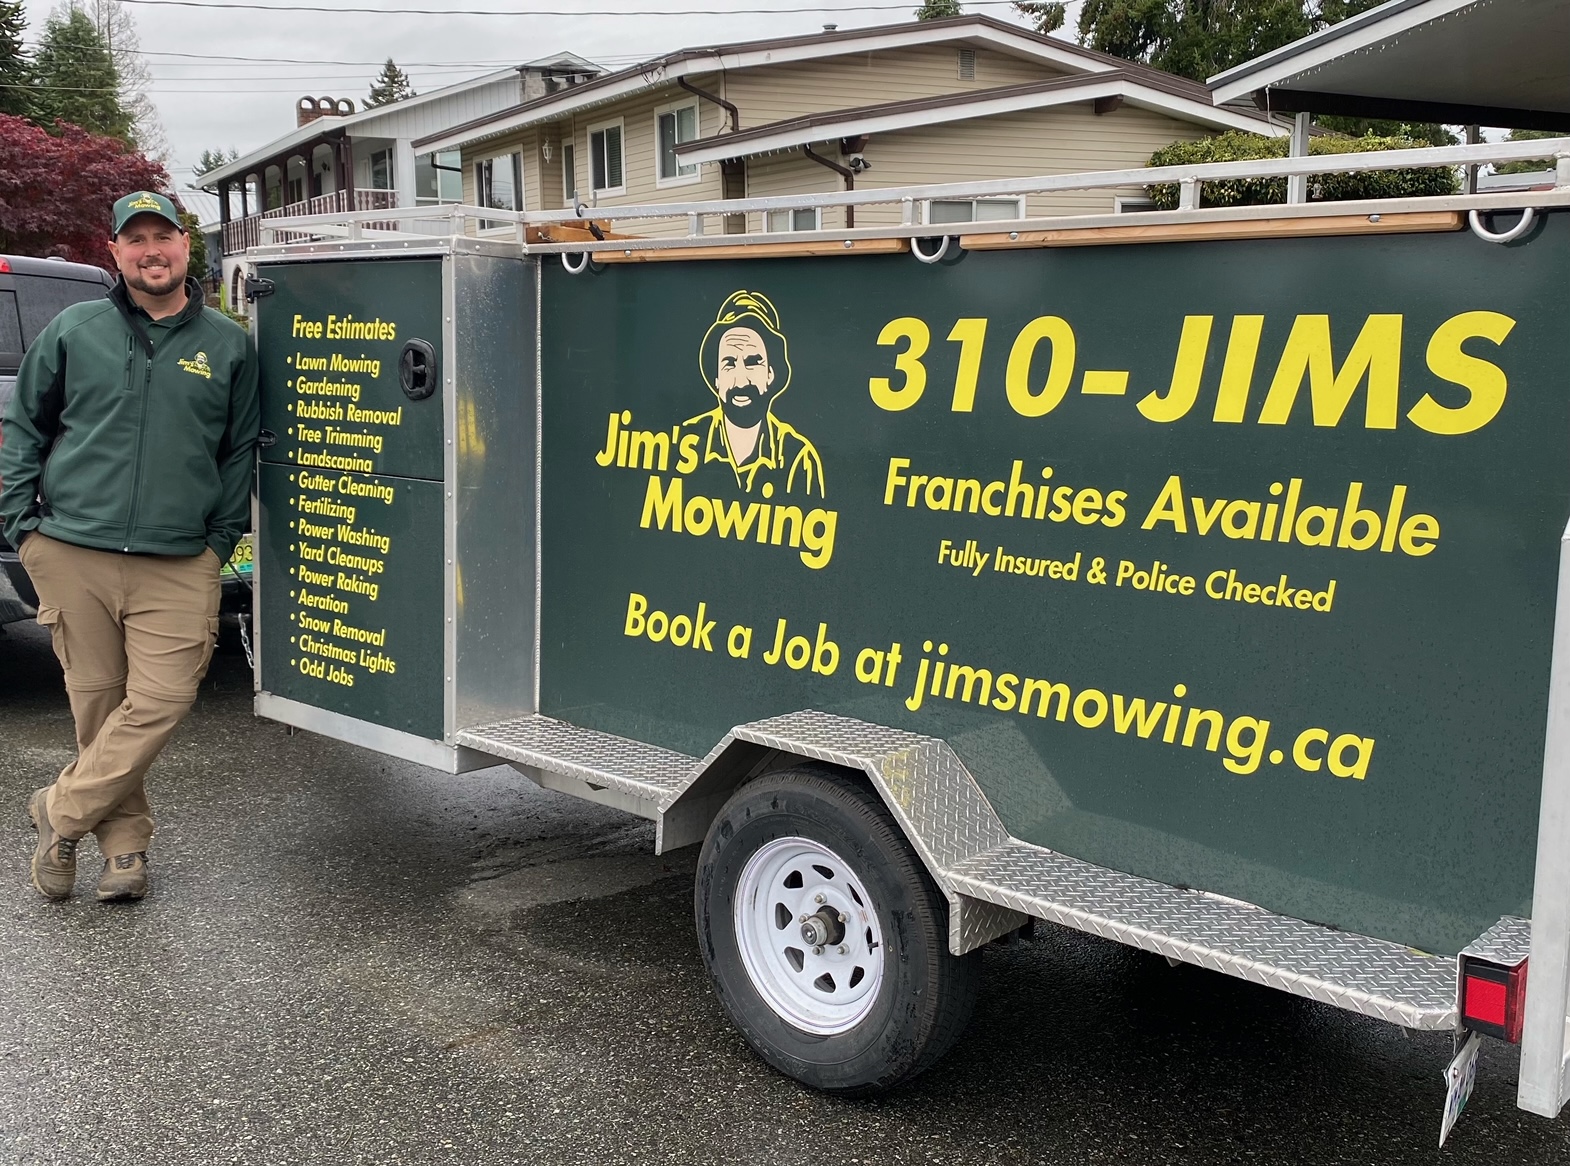 Jim’s Mowing Landscape Franchise in British Columbia